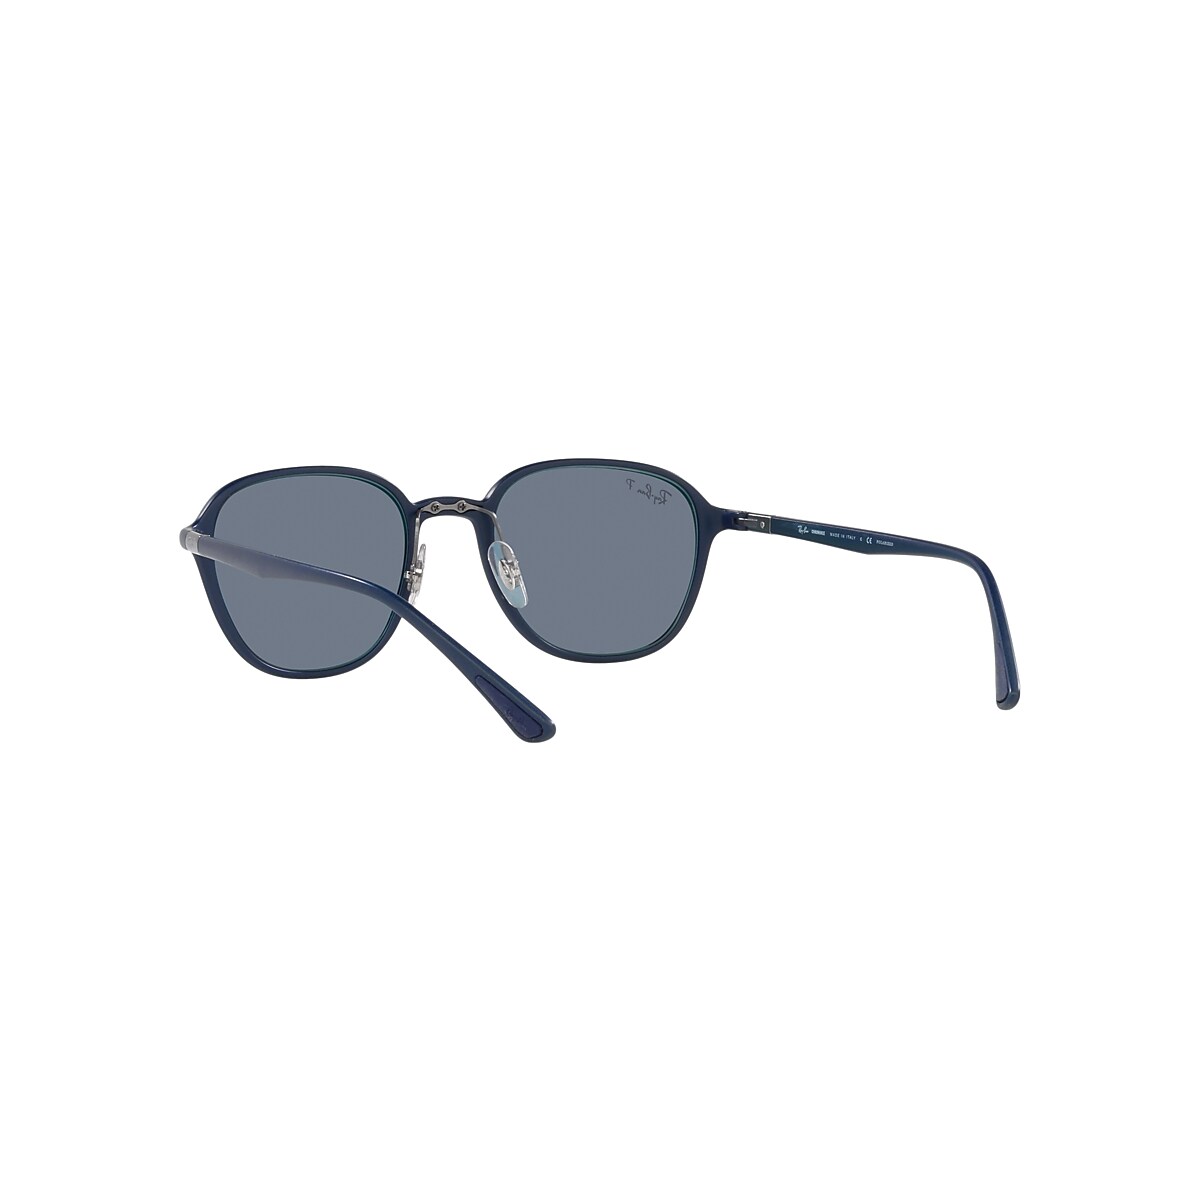 RB4341CH CHROMANCE Sunglasses in Blue and Blue - Ray-Ban